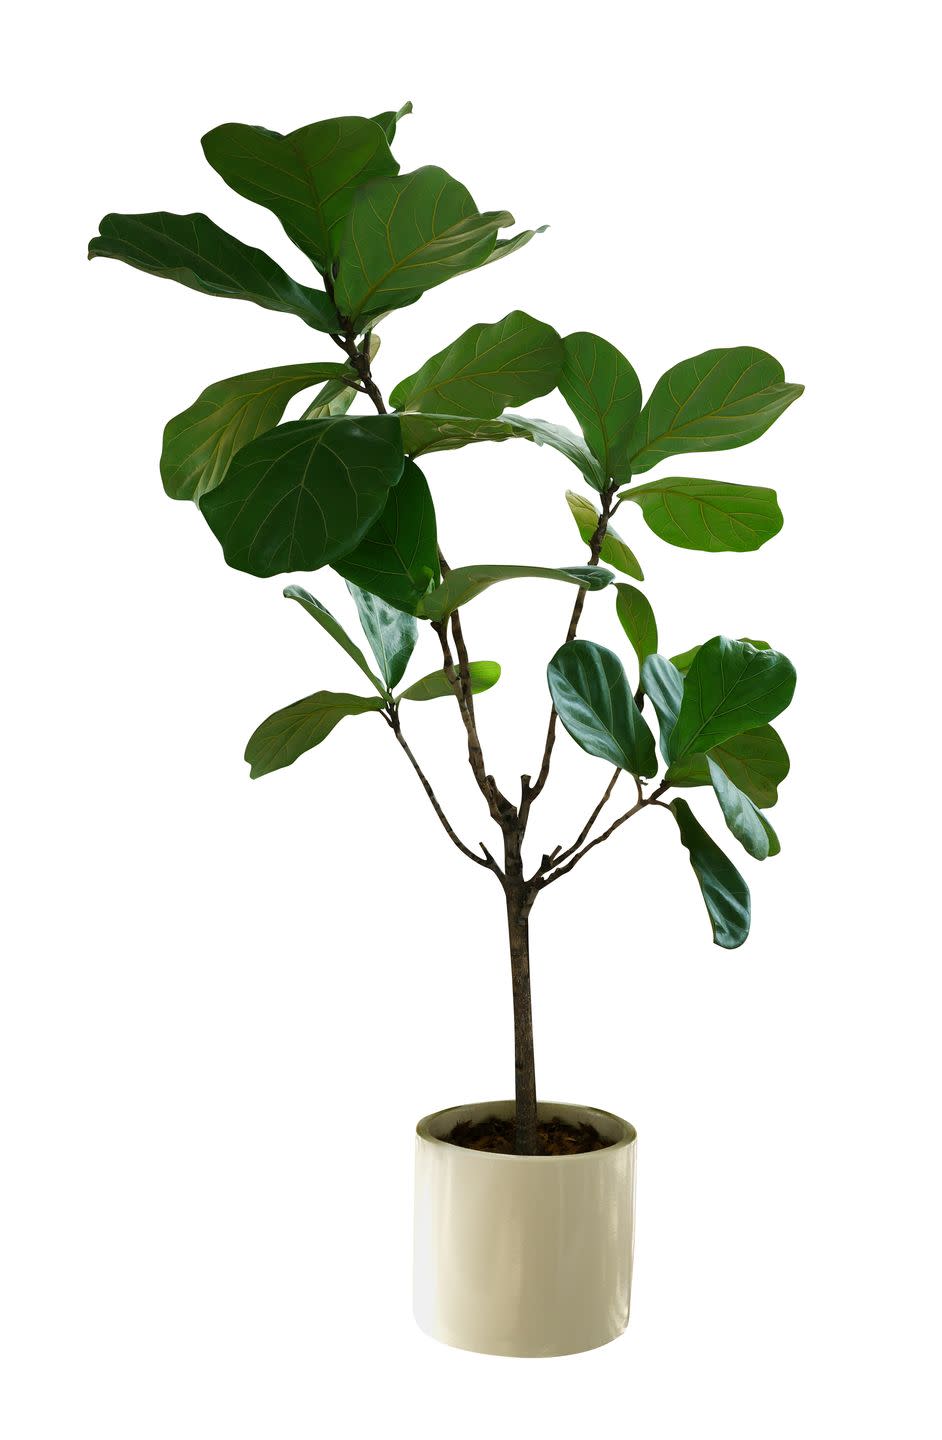 green leaves tropical houseplant fiddle leaf fig tree ficus lyrata in small ceramic pot, ornamental tree isolated on white background, clipping path included